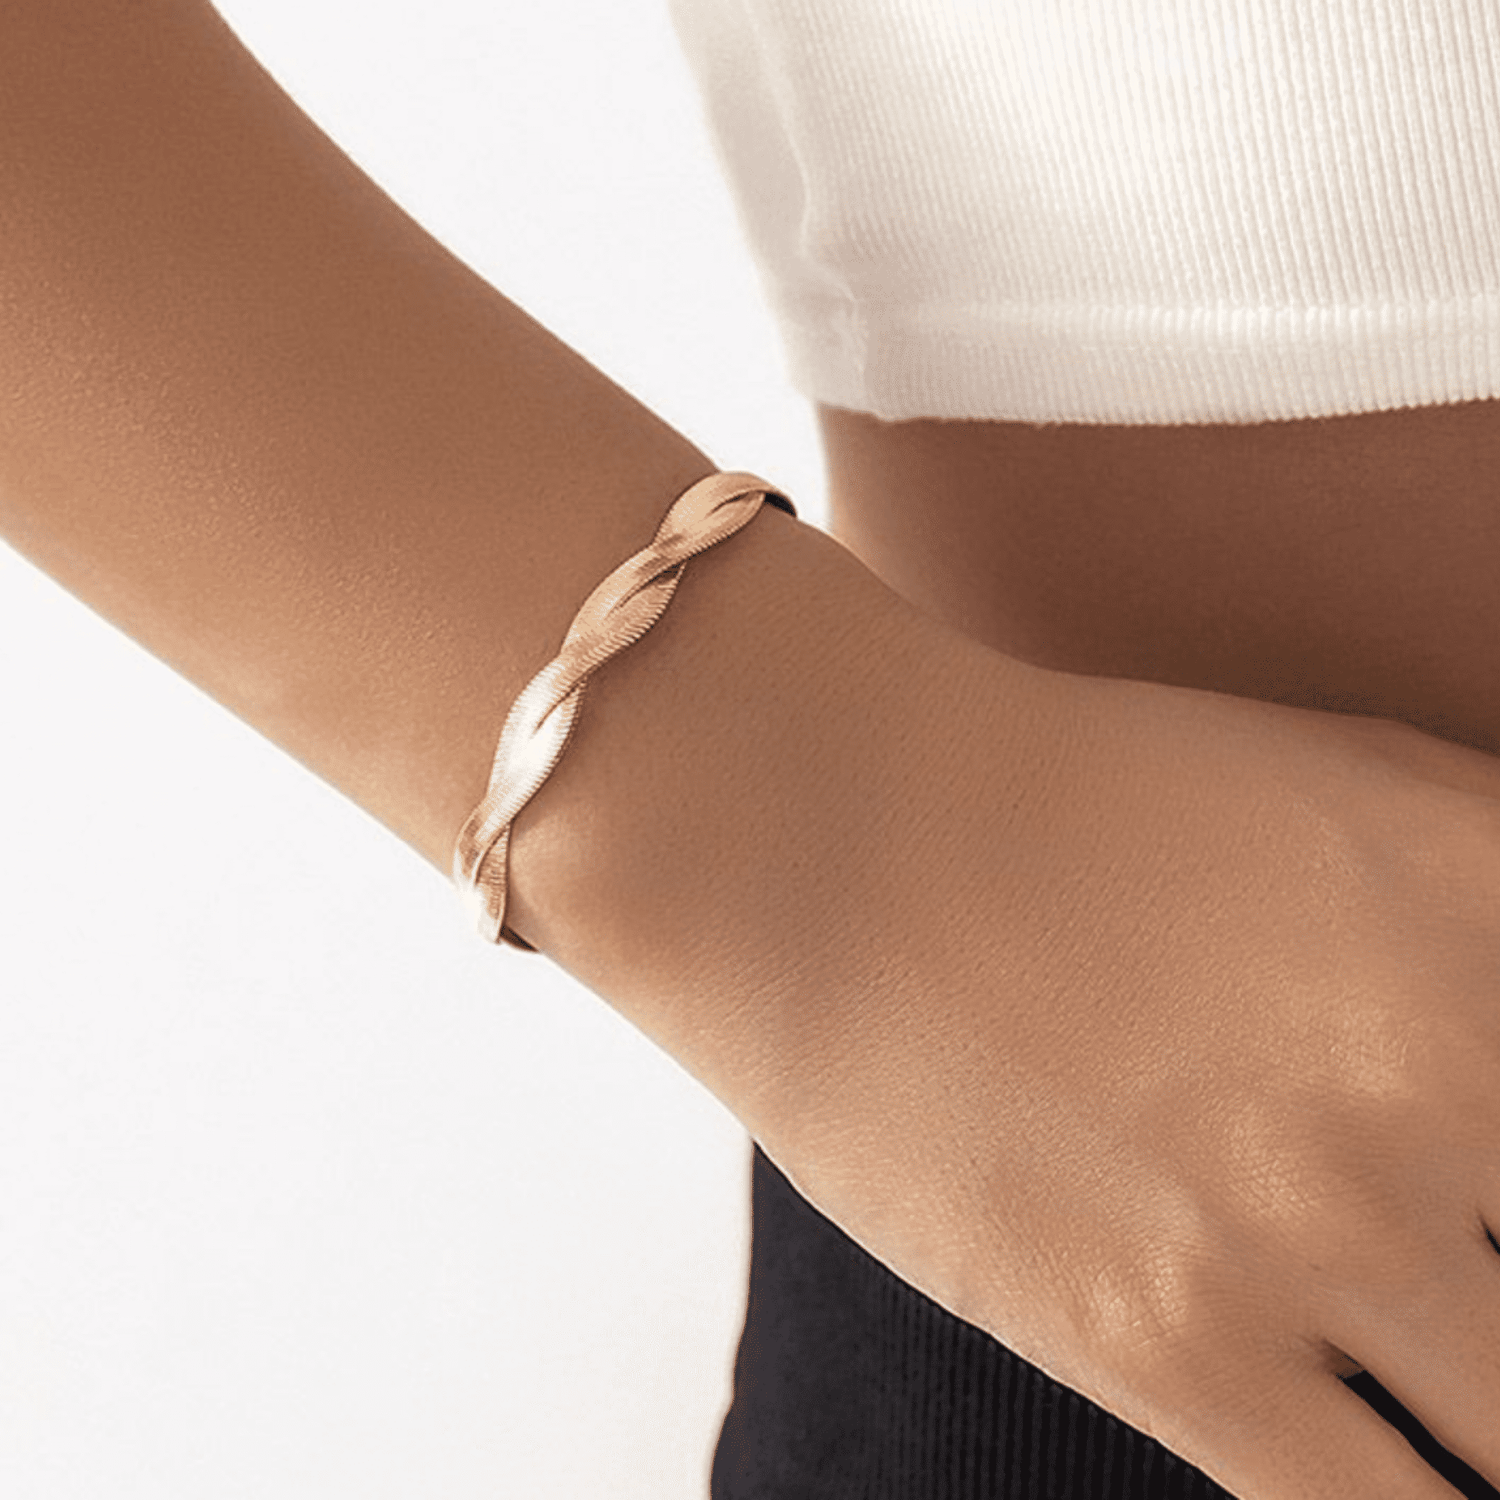 "Timeless Women's Herringbone Bracelet - Expertly Crafted with 18K Gold Plating for Enduring Beauty"